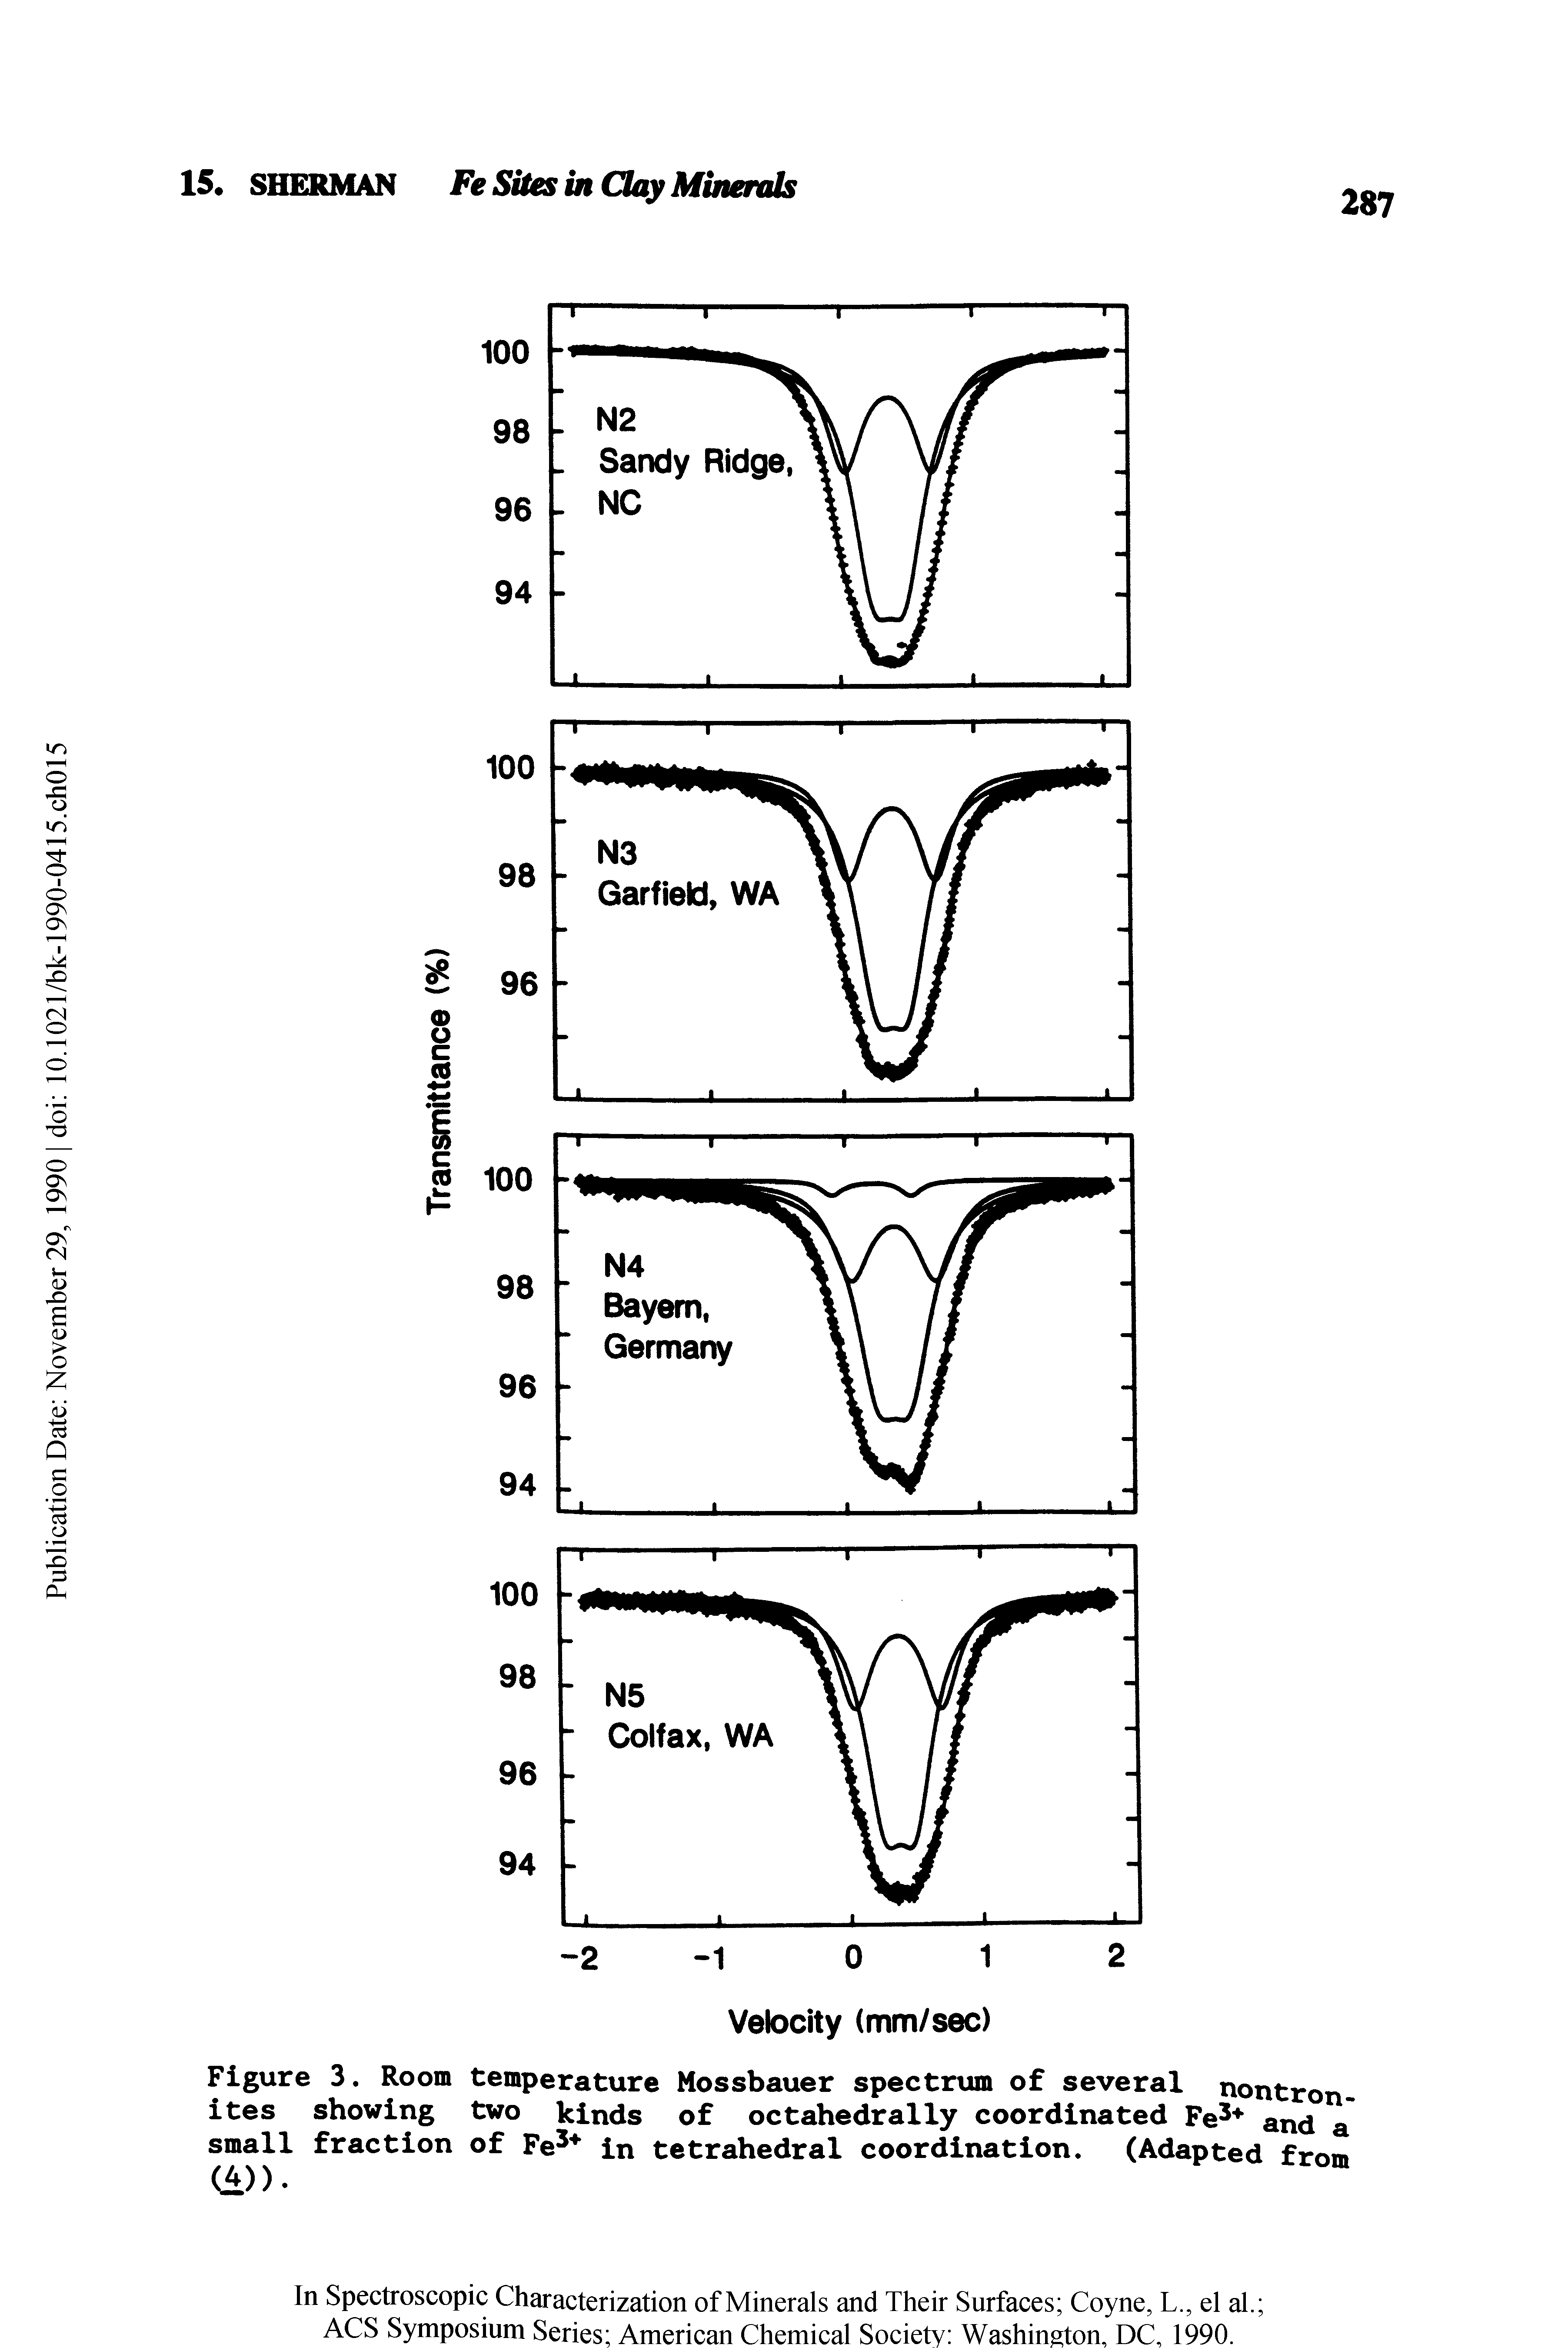 Figure 3. Room temperature Mossbauer spectrum of several nontron-ites showing two kinds of octahedrally coordinated Fe3+ and a" small fraction of Fe3+ in tetrahedral coordination. (Adapted from <4)>.